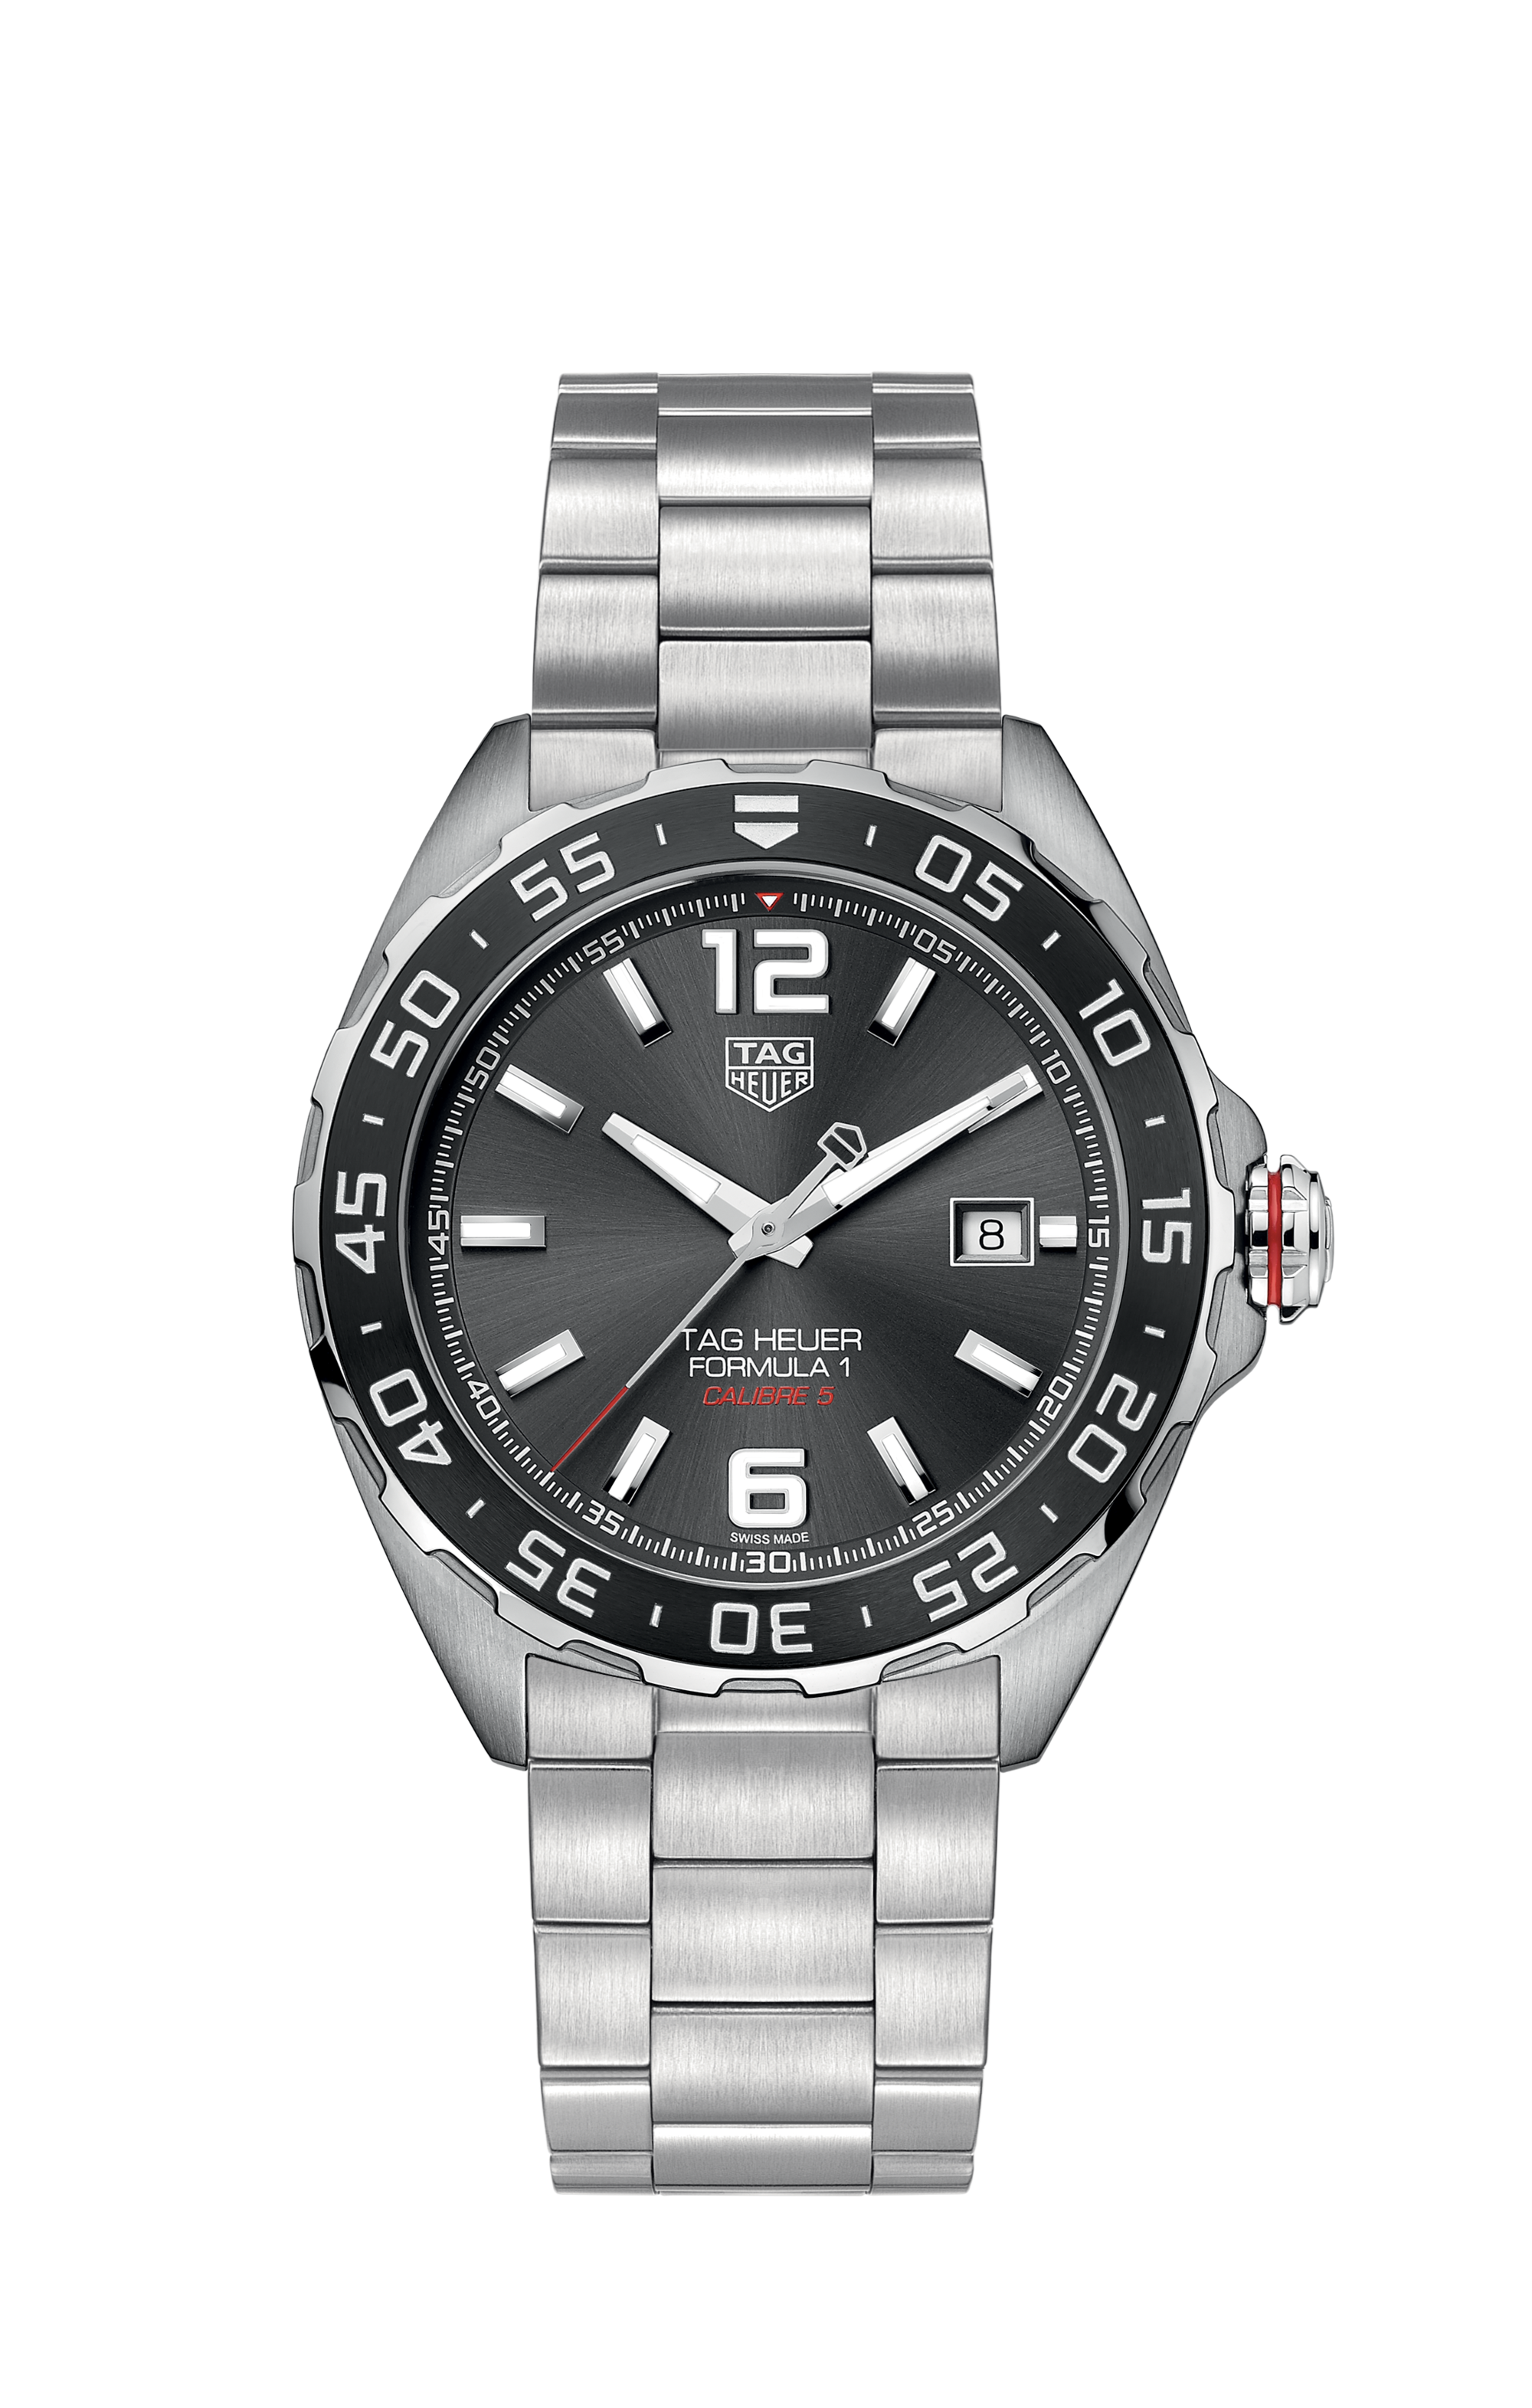 TAG Heuer Aquaracer WBD1314 32mm Stainless Steel Ladies WatchTAG Heuer Aquaracer WBD1314. BA0740